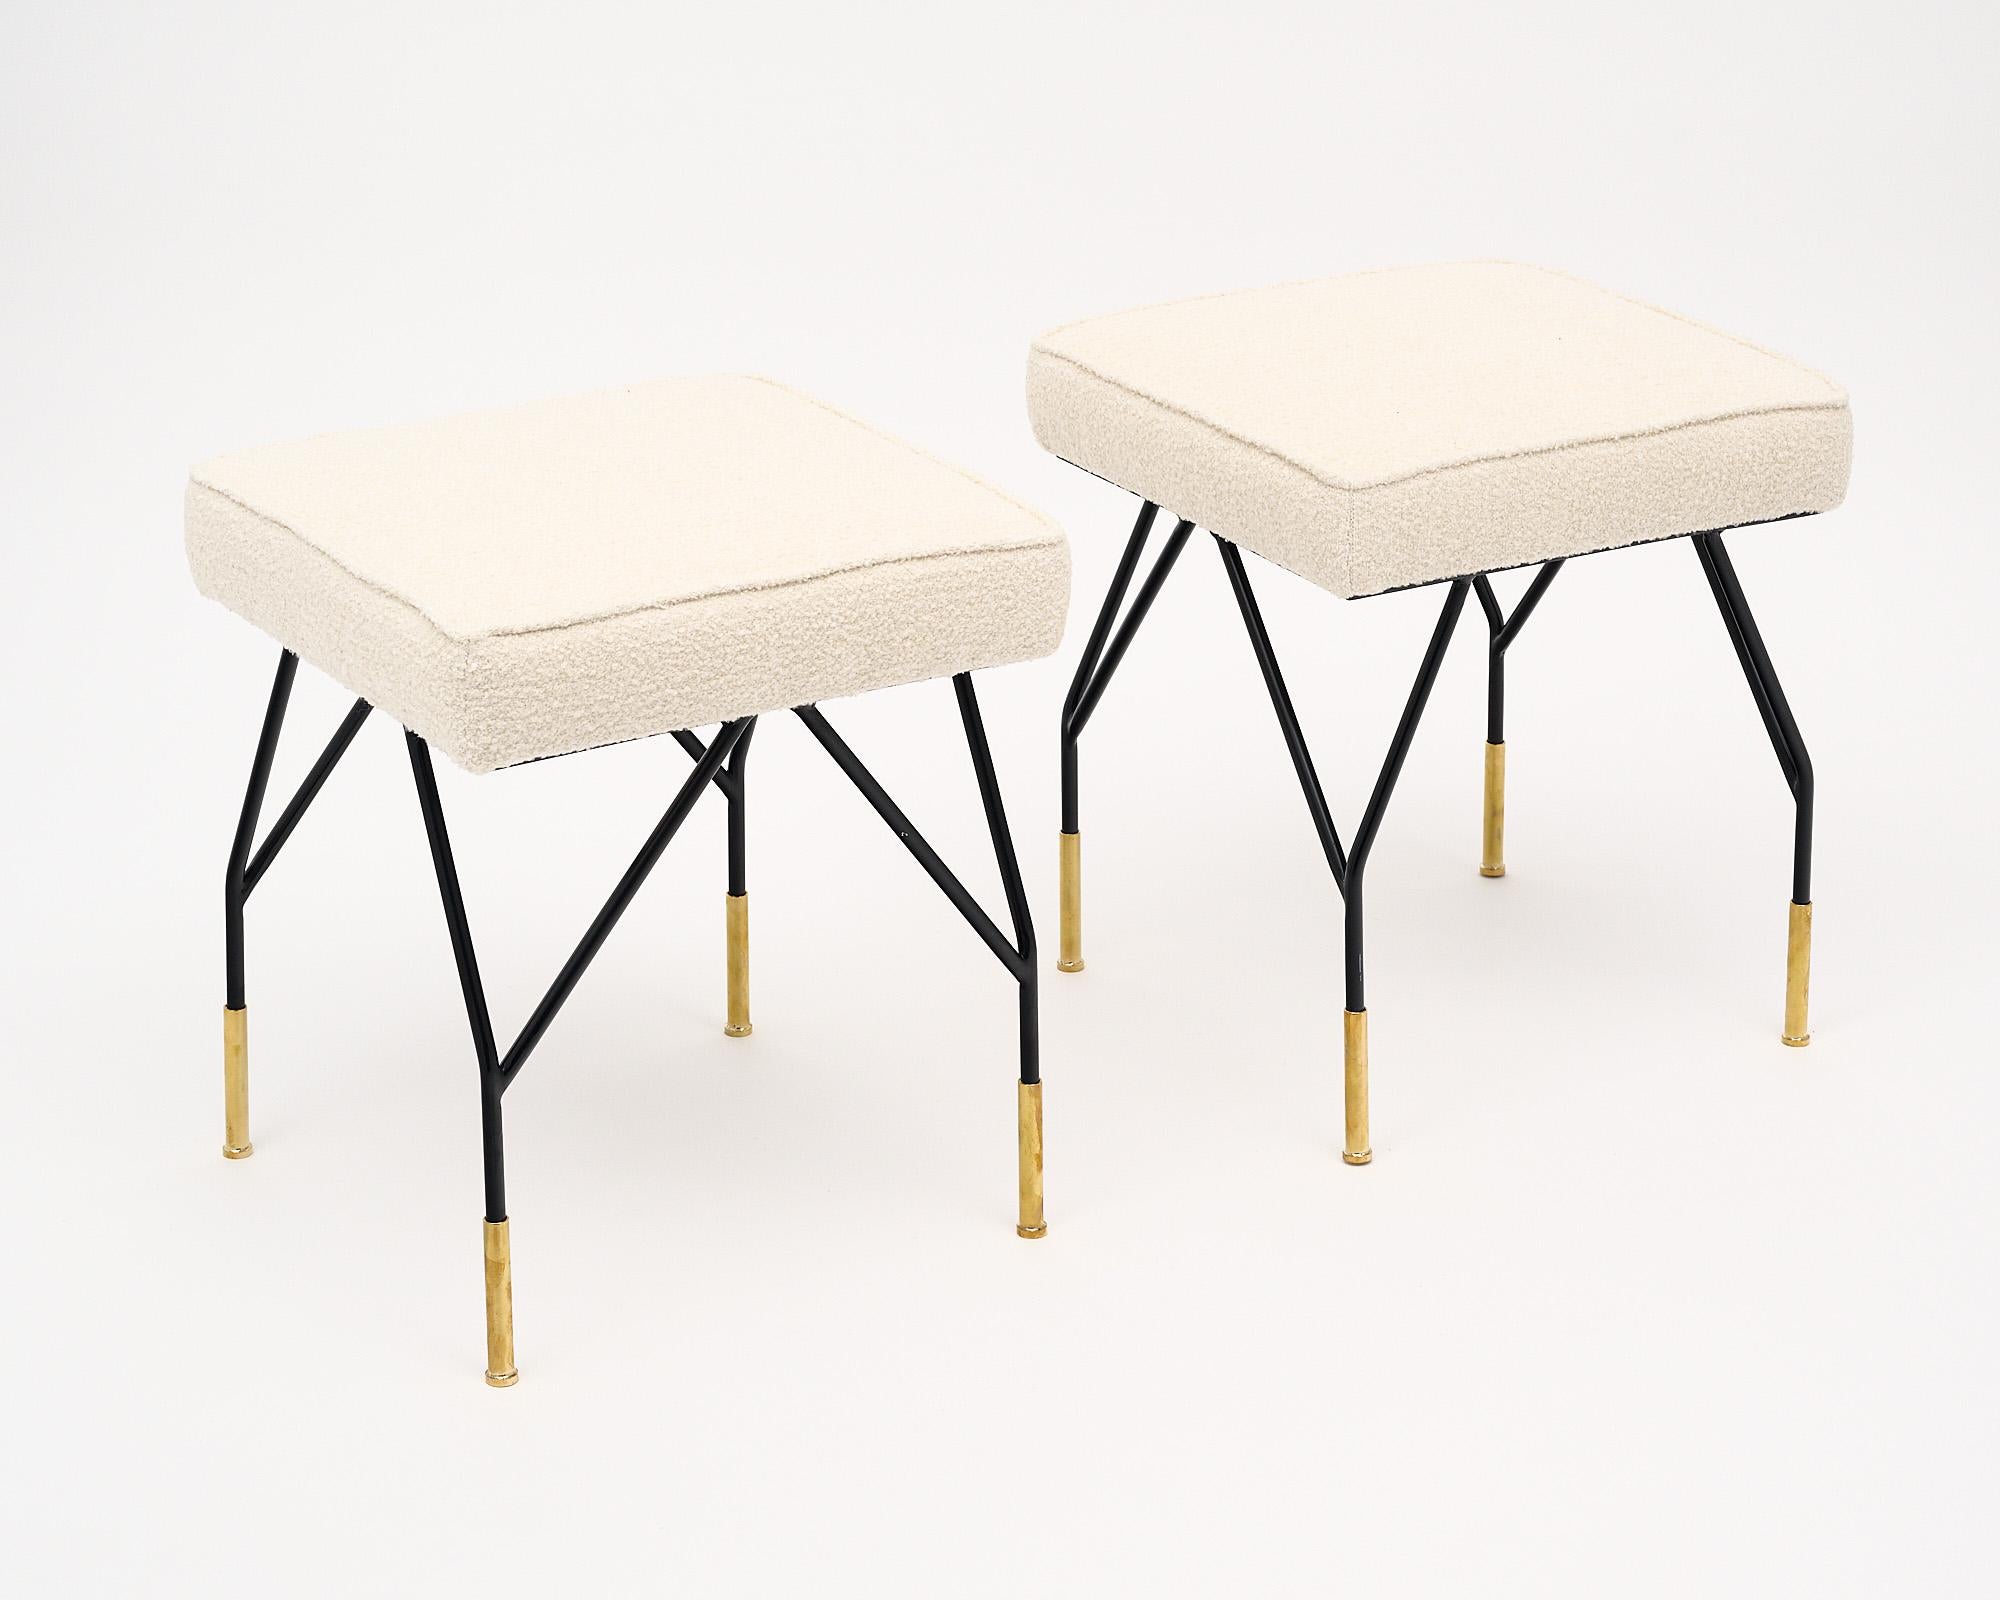 Pair of Italian stools with black lacquered steel and brass legs. New upholstery is done in a white wool blend.